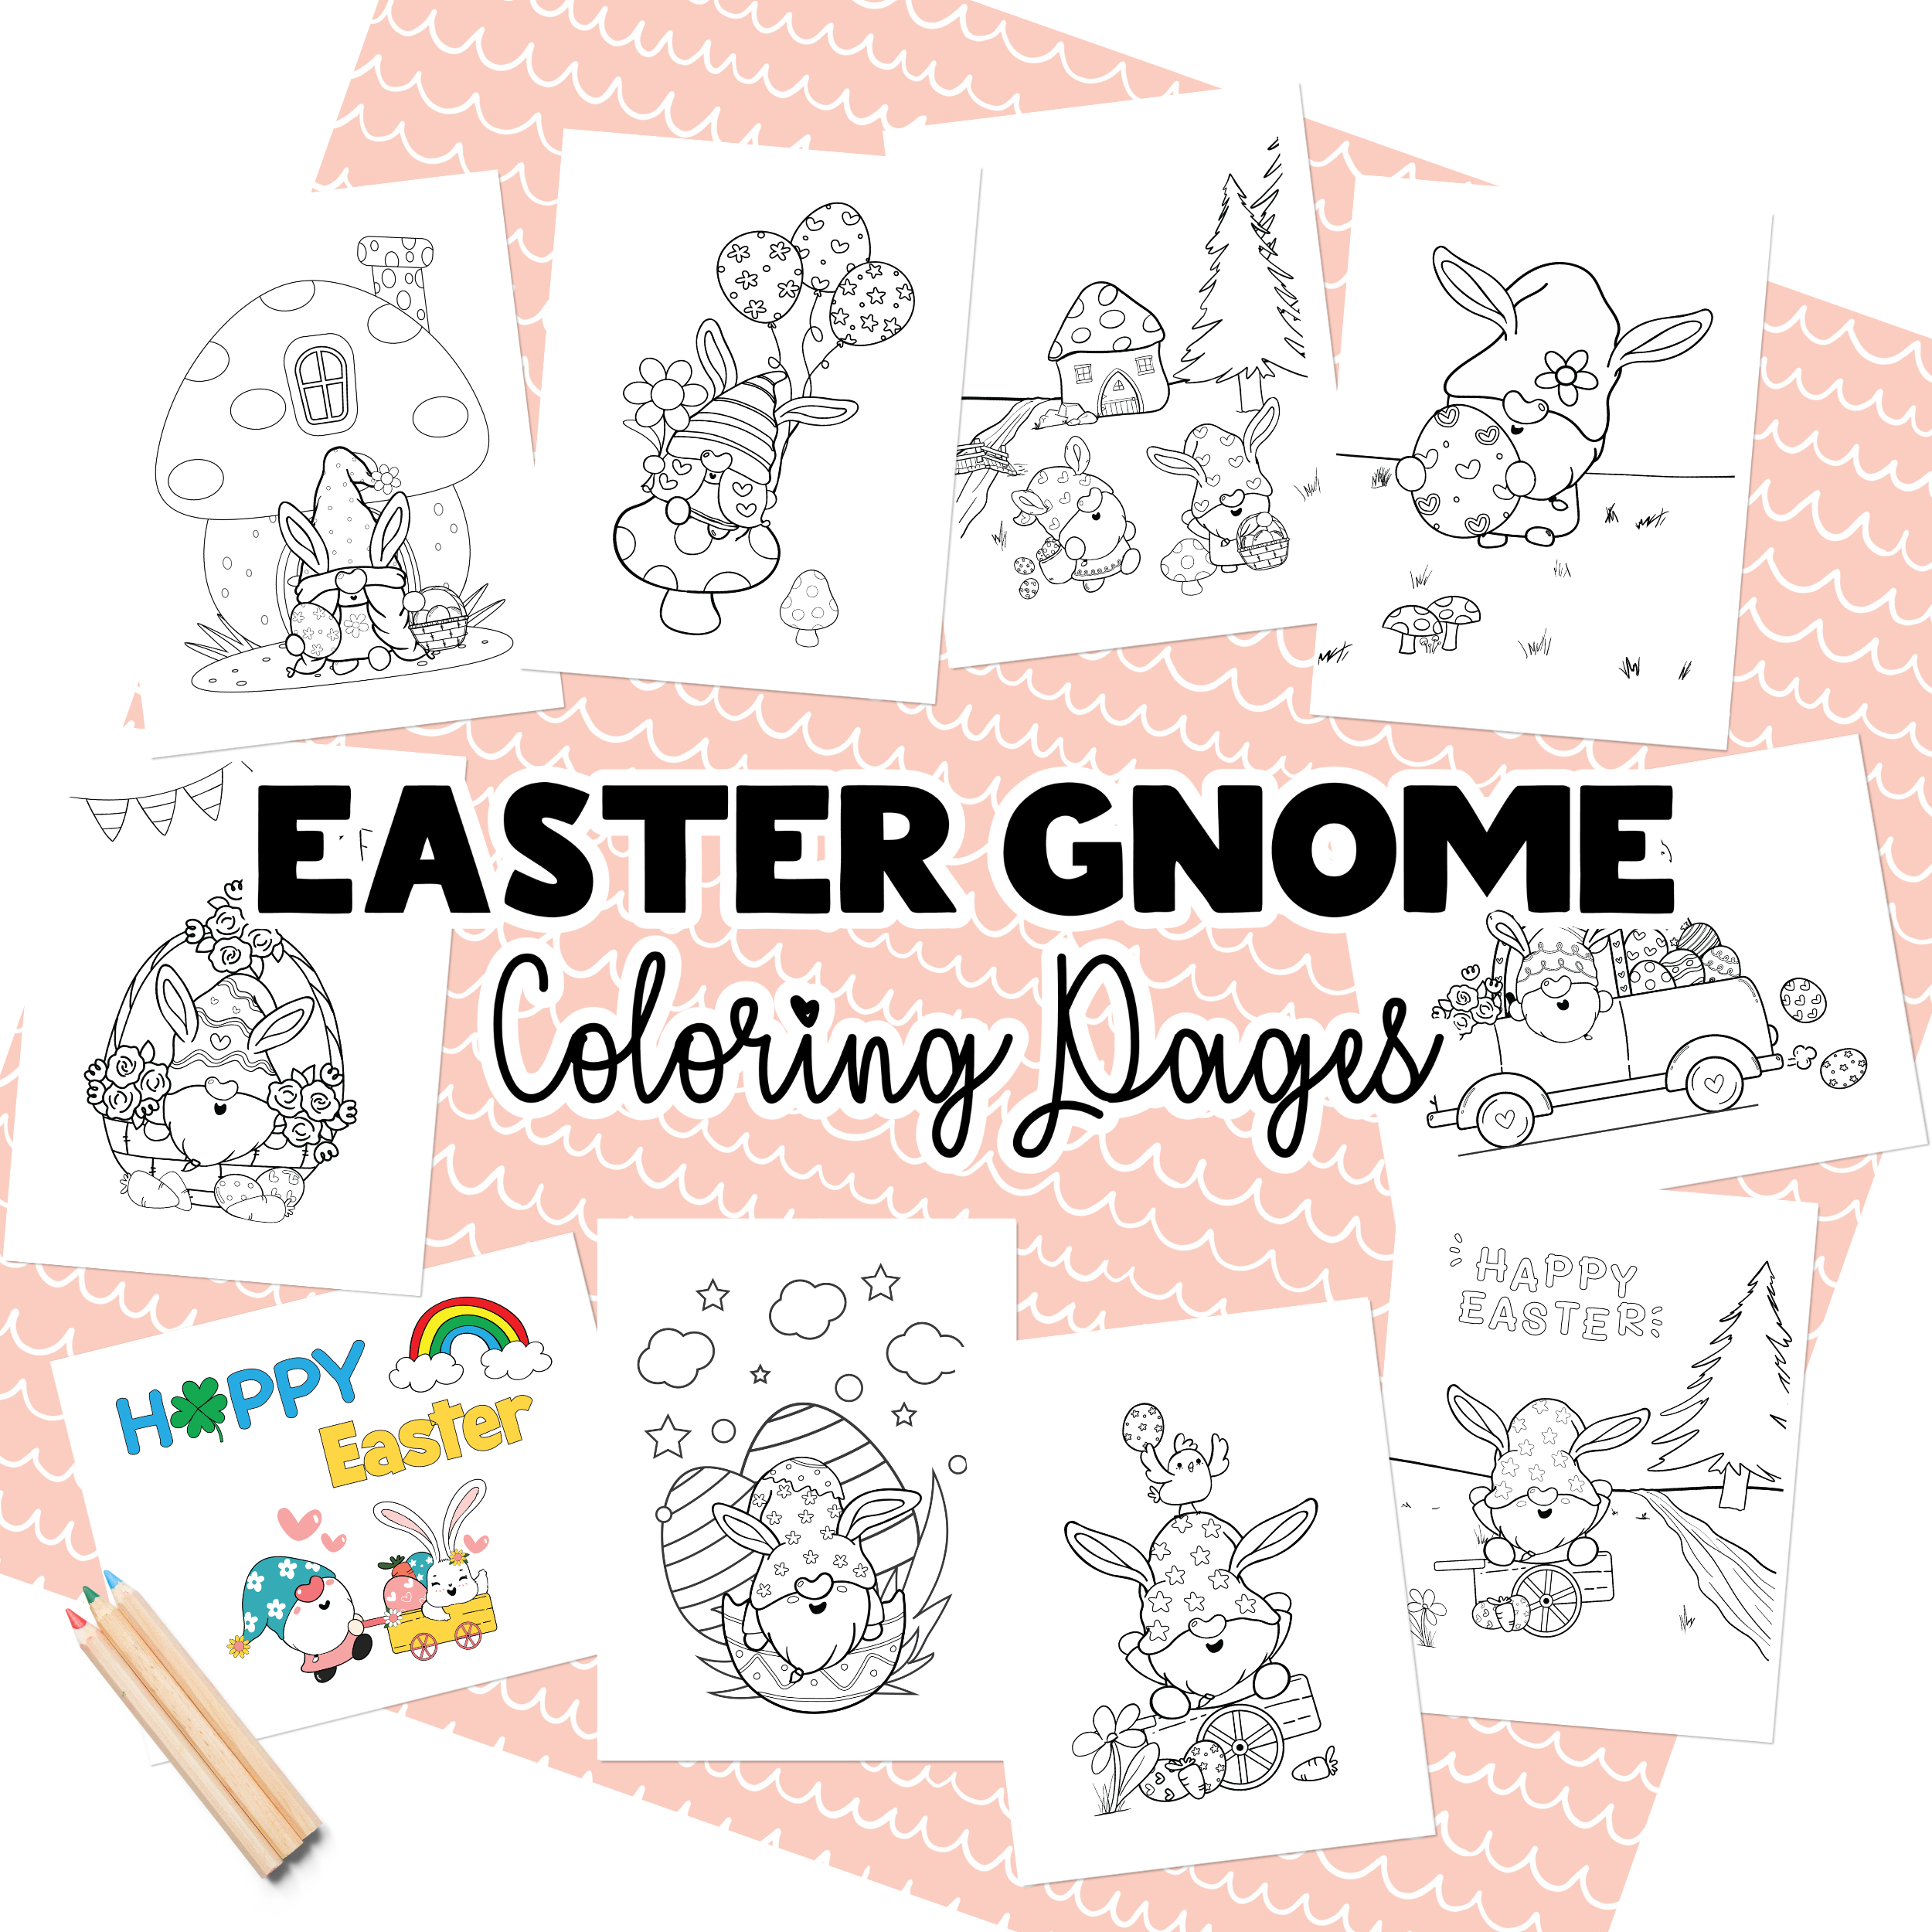 FREE PRINTABLE EASTER COLORING PAGES